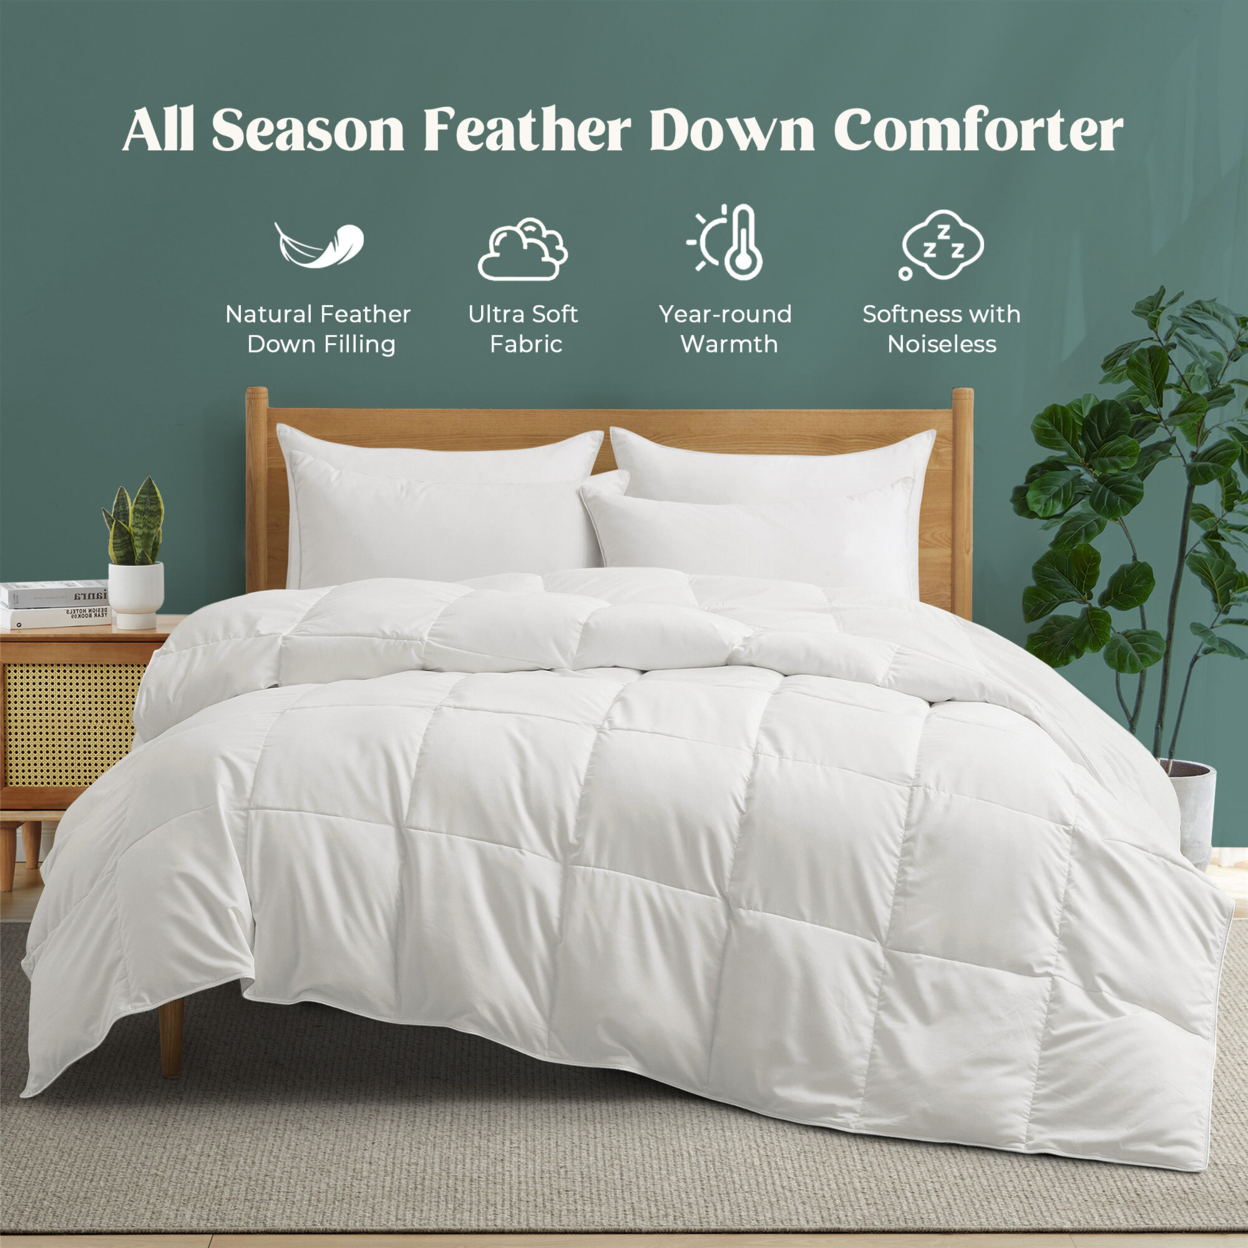 White Goose Feather Fiber And Down Comforter-Lightweight&Medium Weight, Sleep Soundly With Noiseless - Medium Weight, Full/Queen